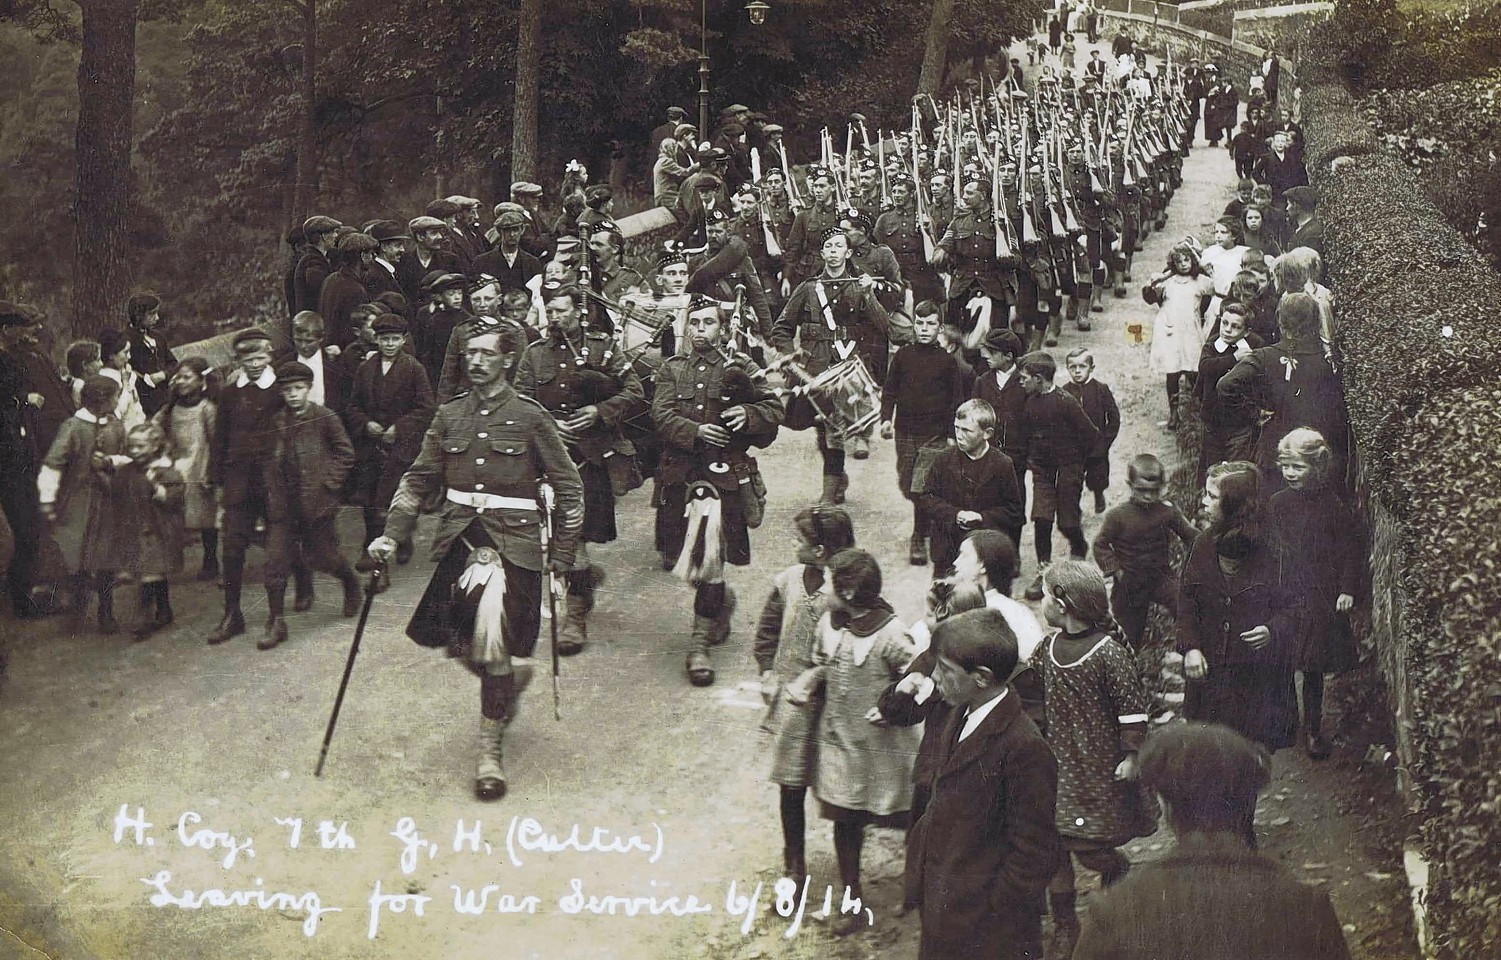 Soldiers who served in WWI with the 7th Battalion Gordon Highlanders. Photo courtesy of Gordon HIghlanders Museum